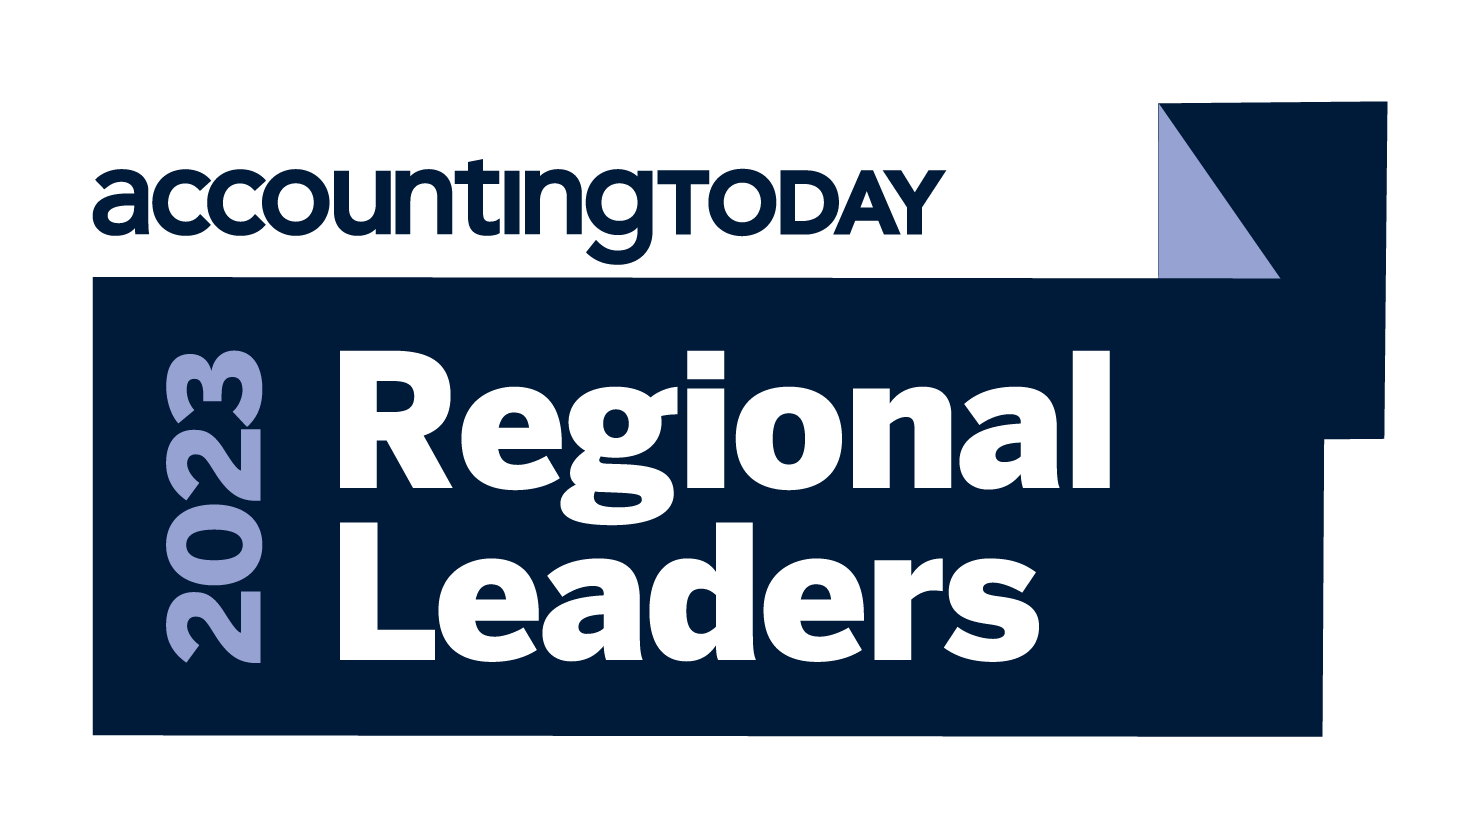 Apple Growth Partners has been recognized as an Accounting Today "Regional Leader" for 2023.